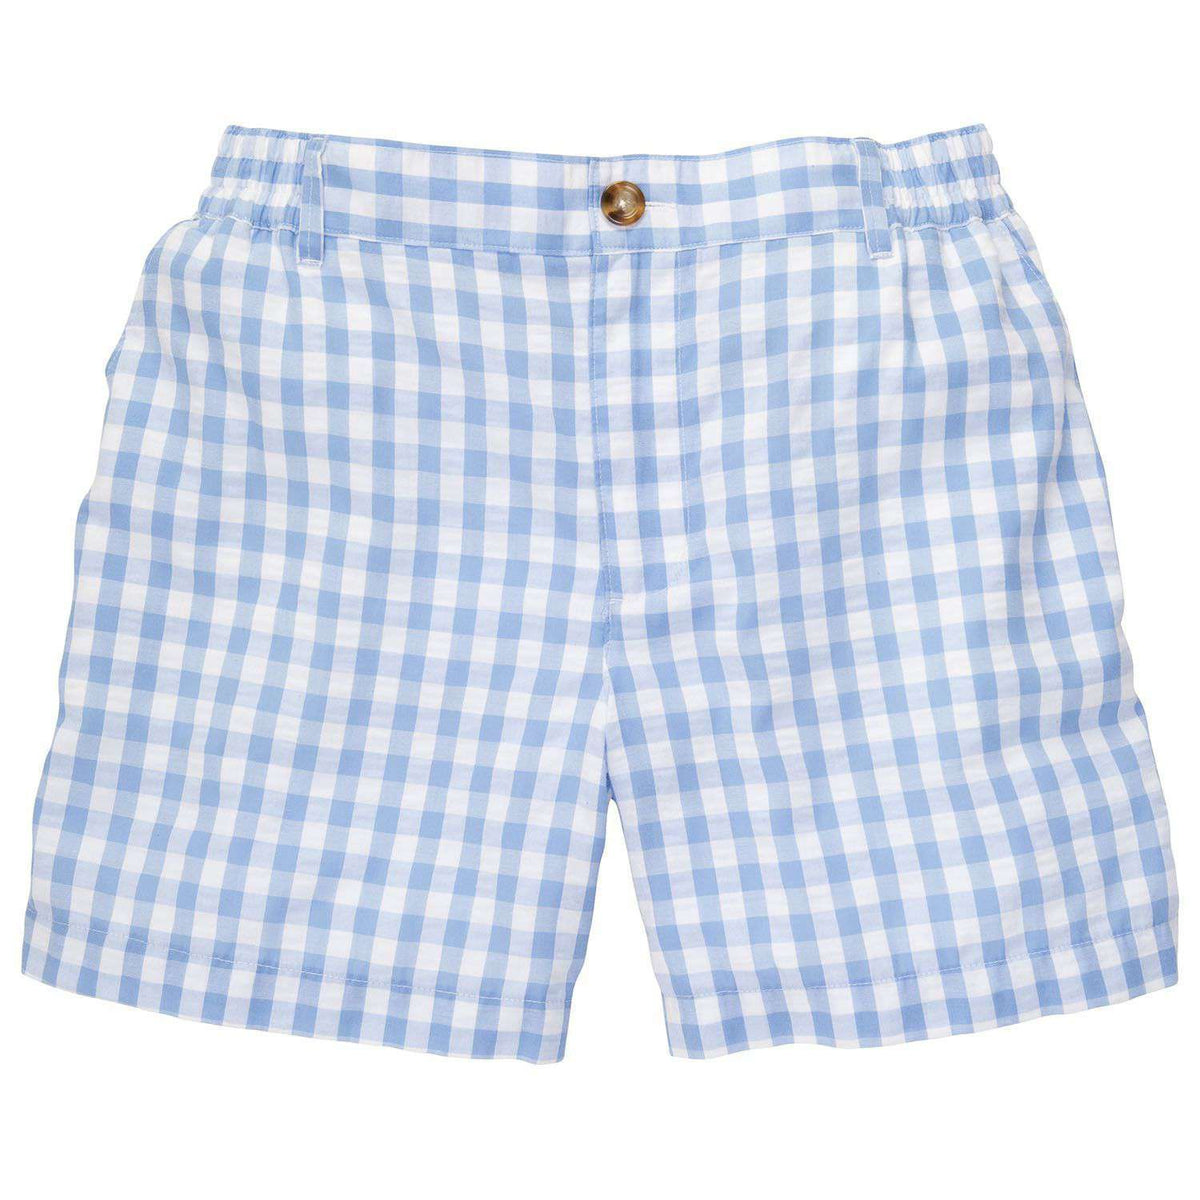 Blue and White Seersucker Shorts by Southern Proper - Country Club Prep